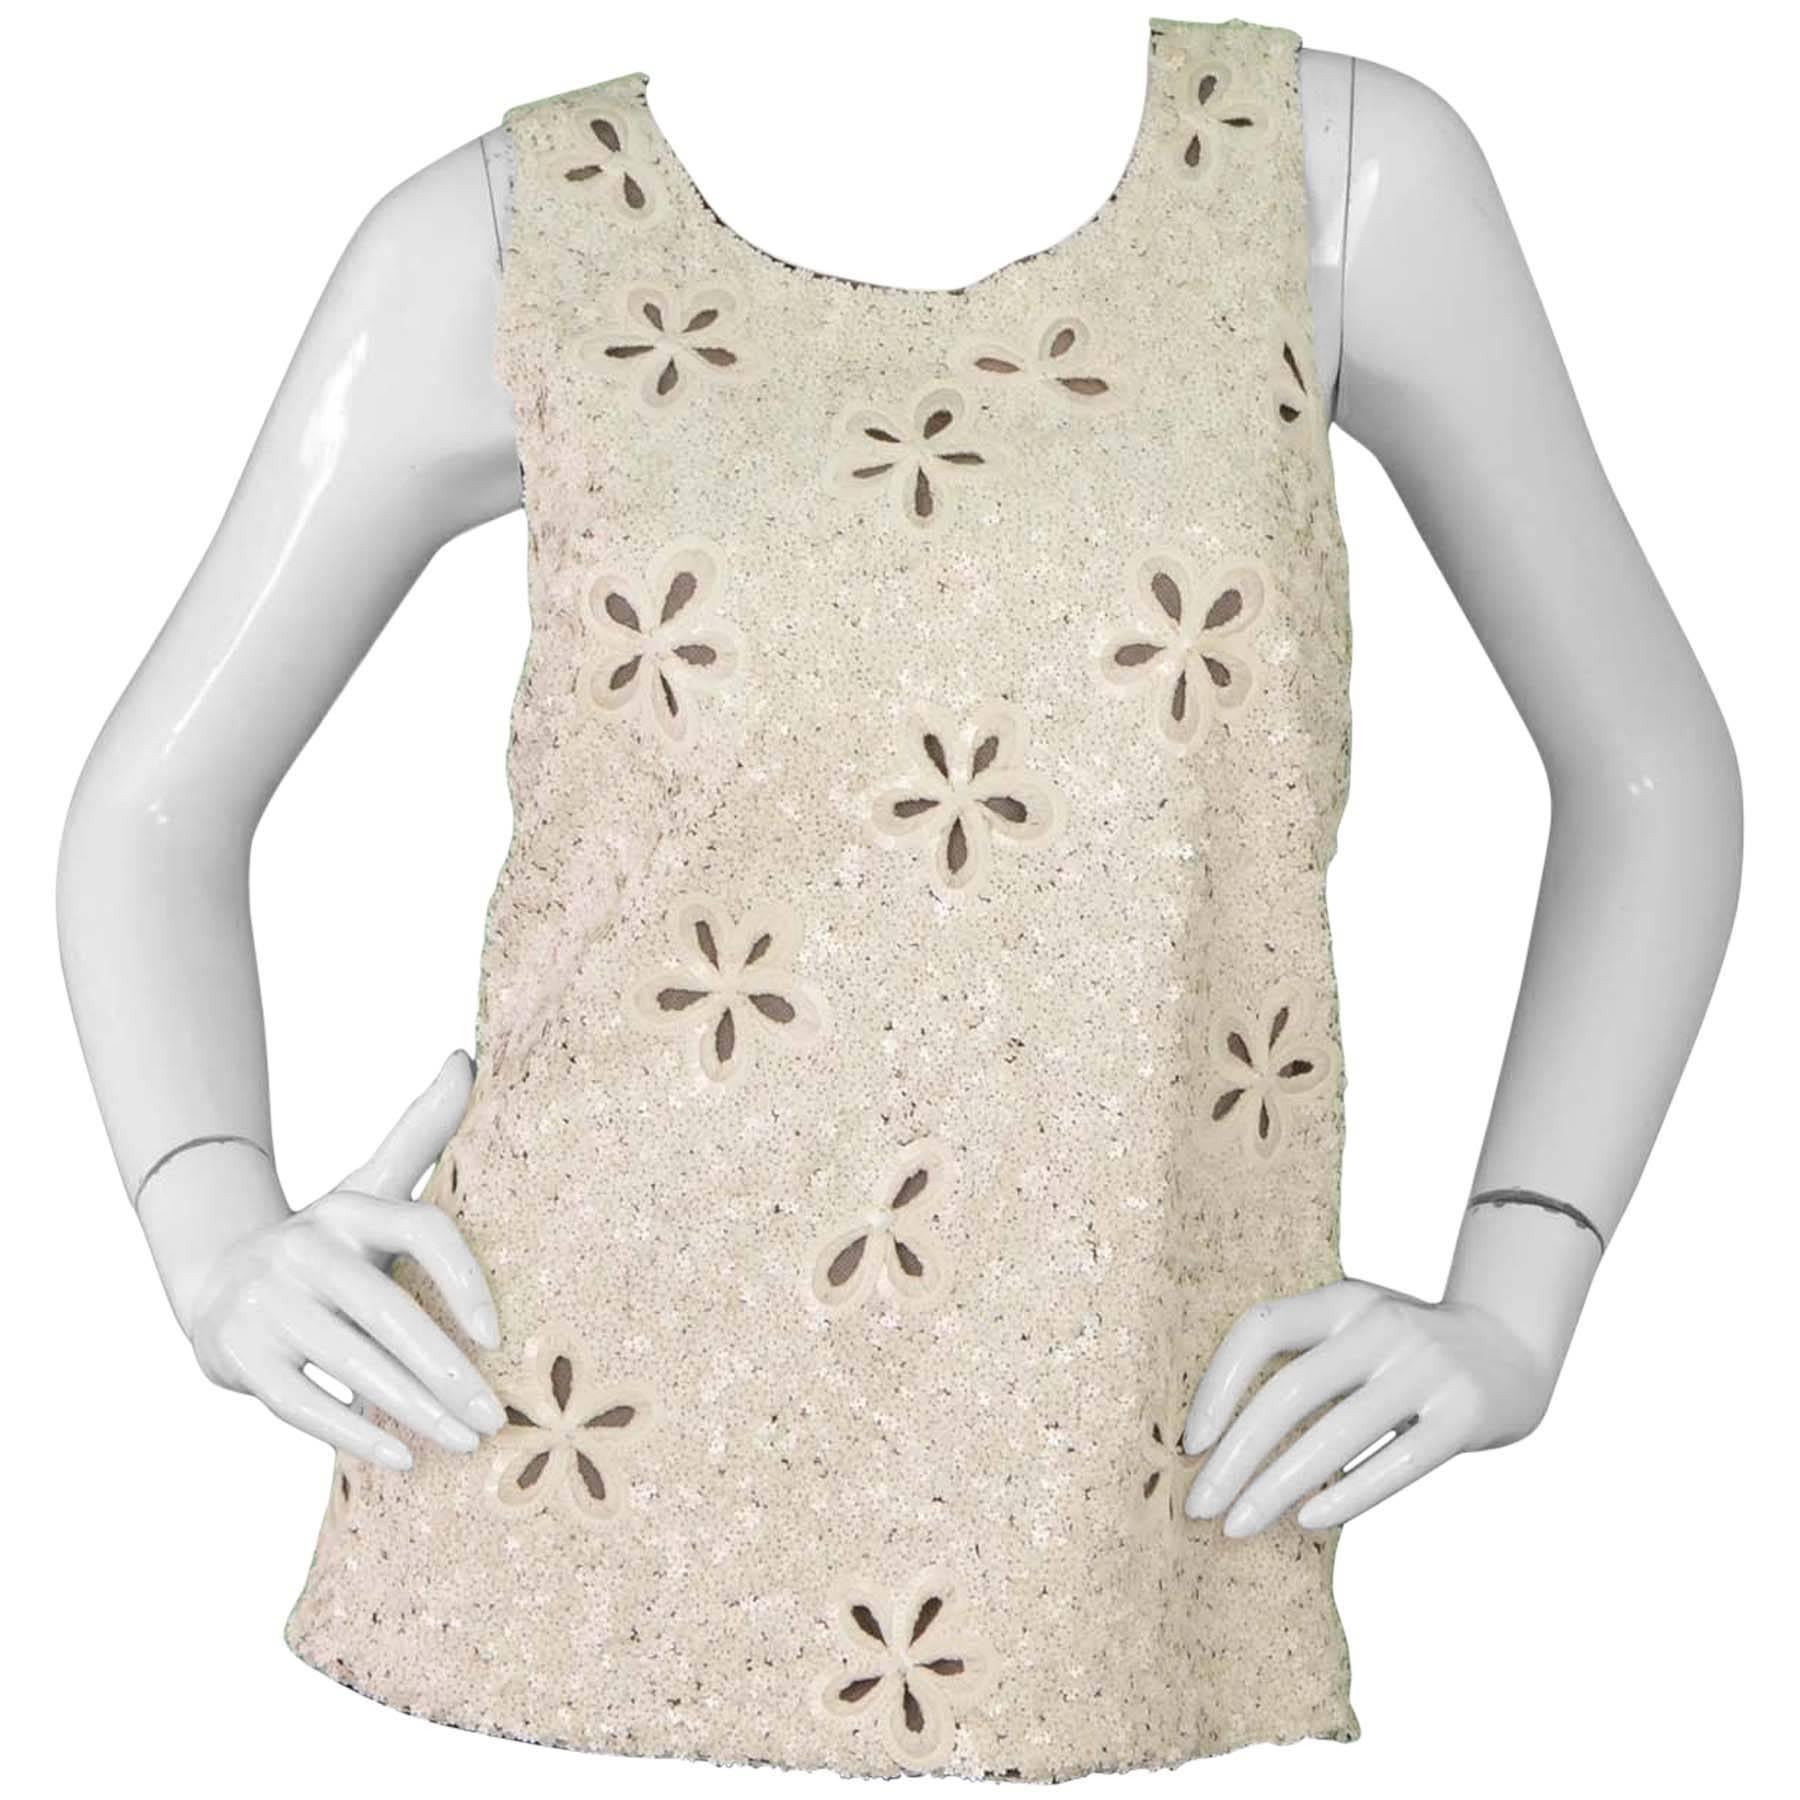 Chanel Ivory Cut out Floral Sequin Sleeveless Top sz 44 rt. $3, 000+